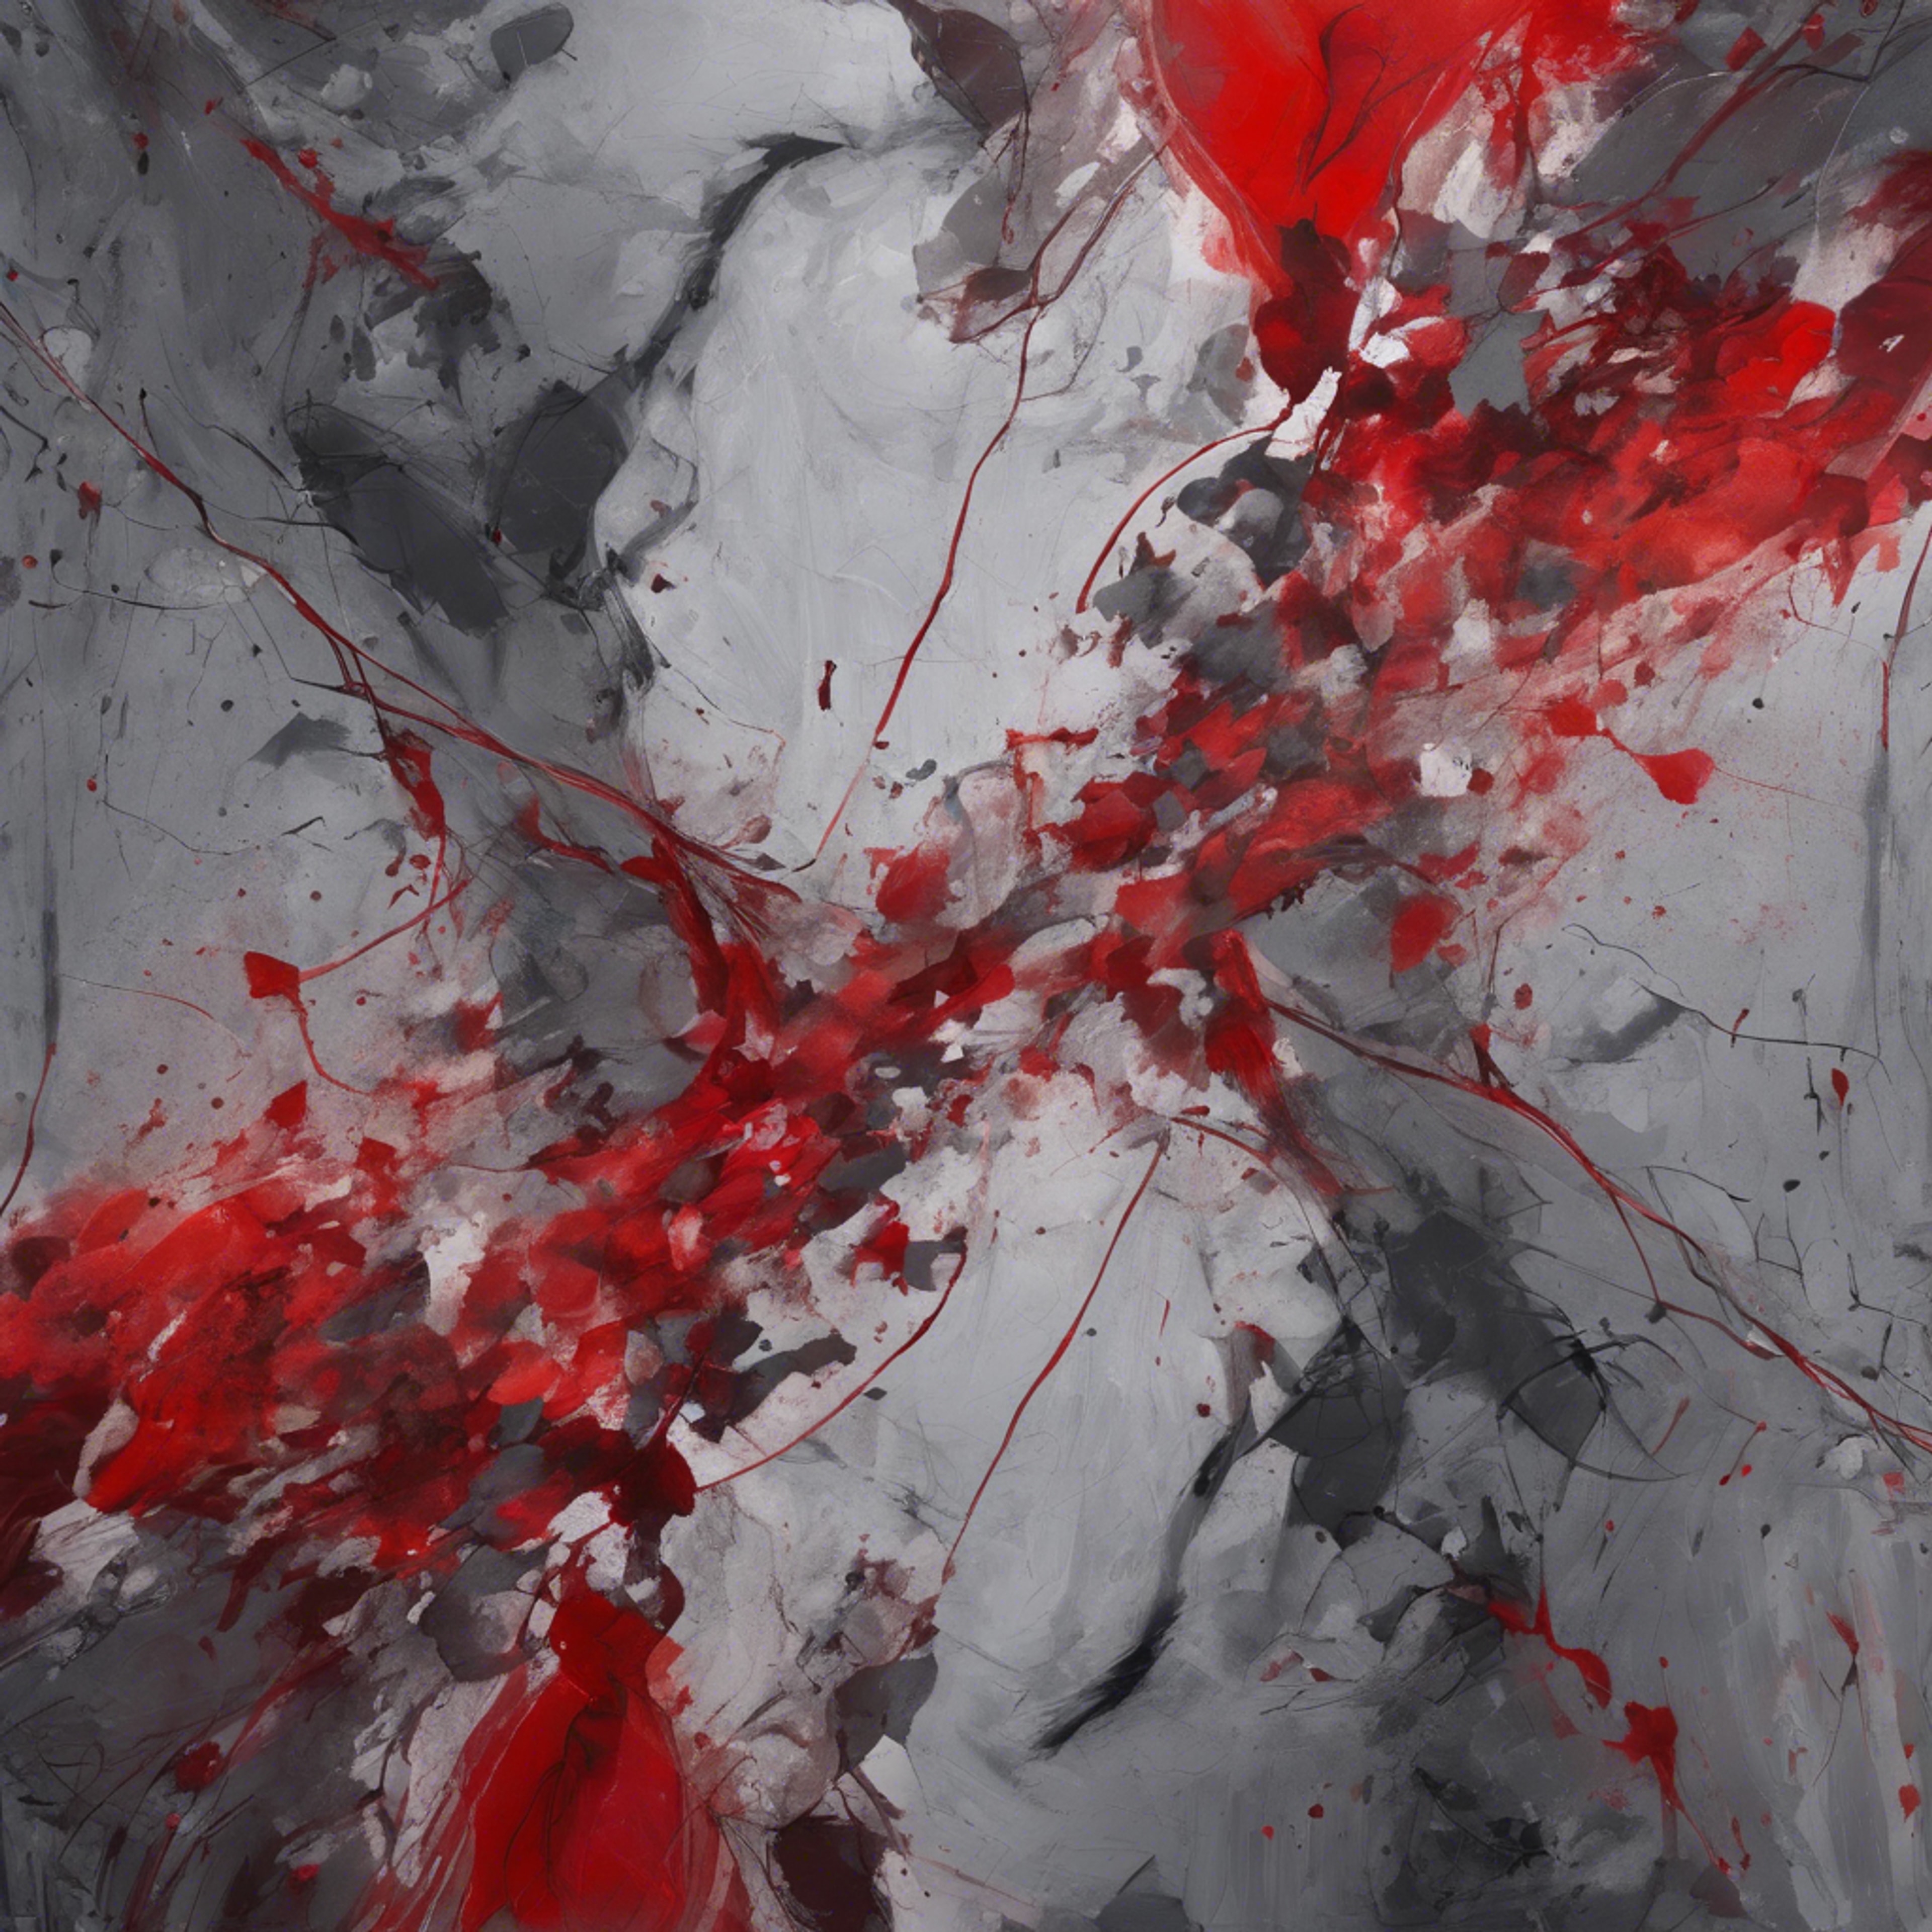 A red and gray abstract painting demonstrating the battle between passion and reason. Tapet[fb490a5db02d428289d0]